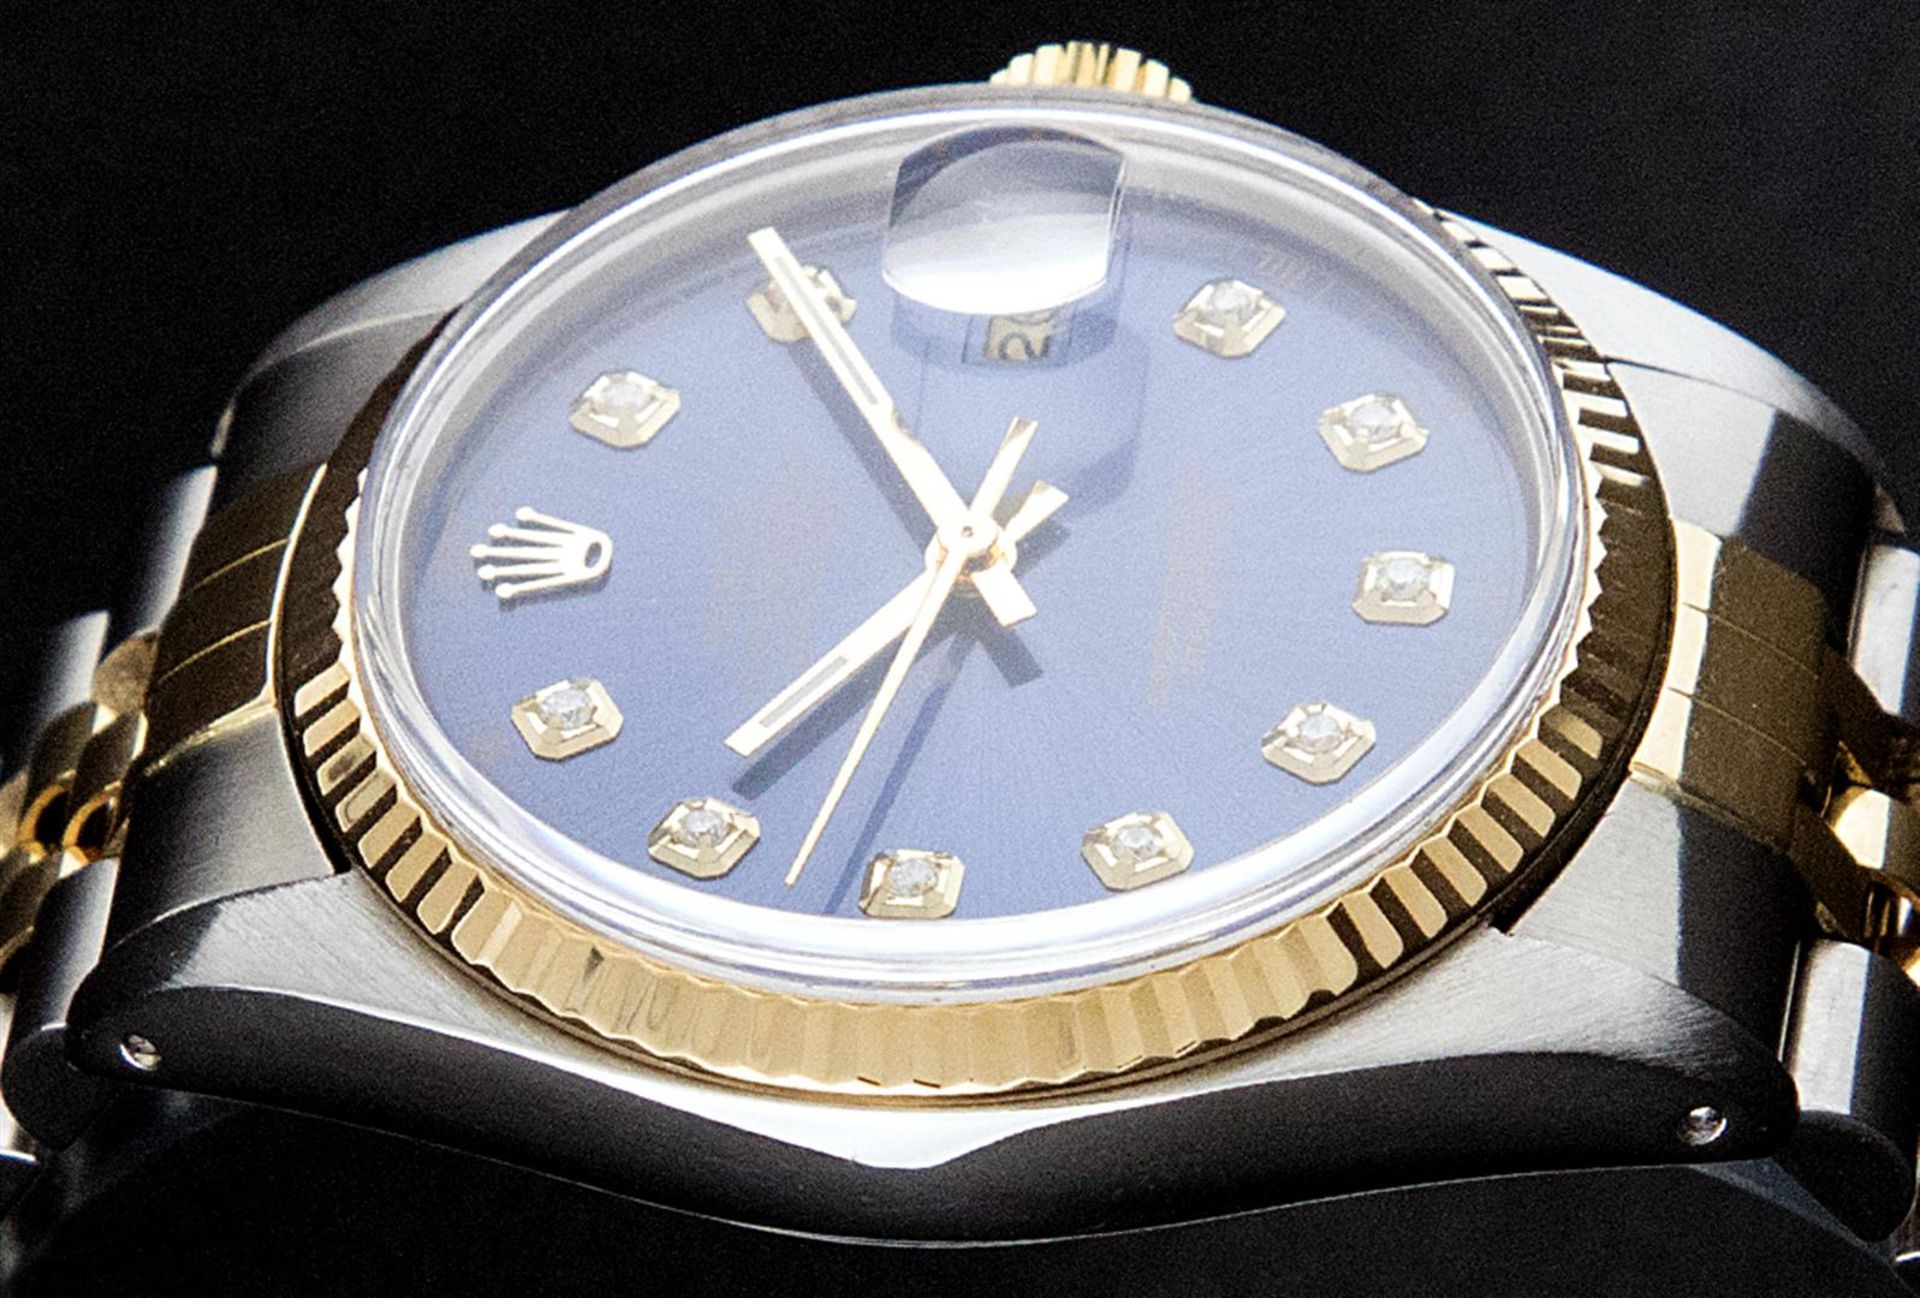 Rolex Mens 2 Tone Blue Diamond 36MM Oyster Perpetual Datejust Wristwatch - Image 3 of 9